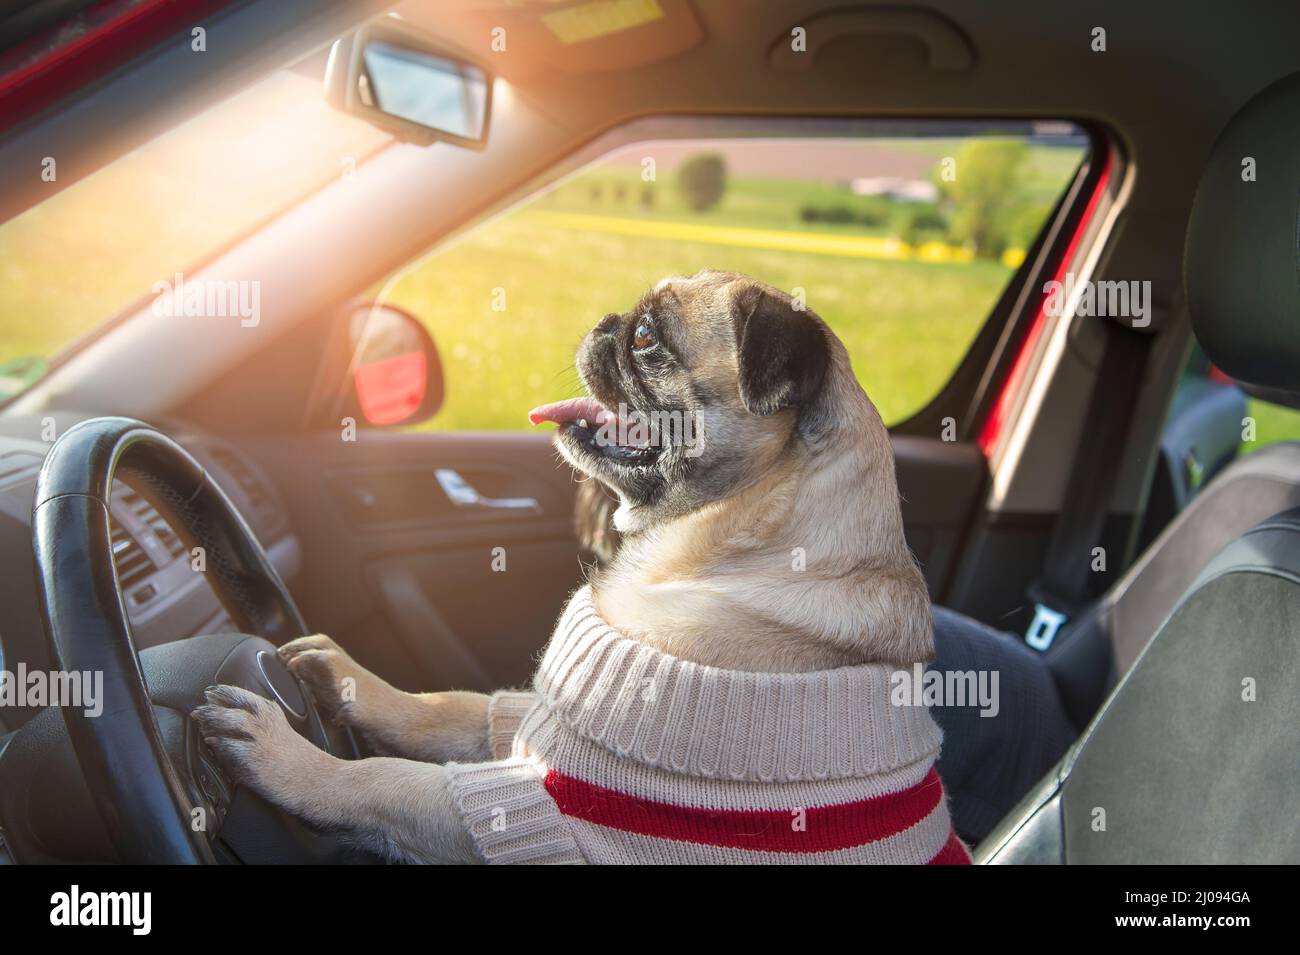 A dog in a sweater controls the car. Funny allusion to self-driving cars in the future. Stock Photo